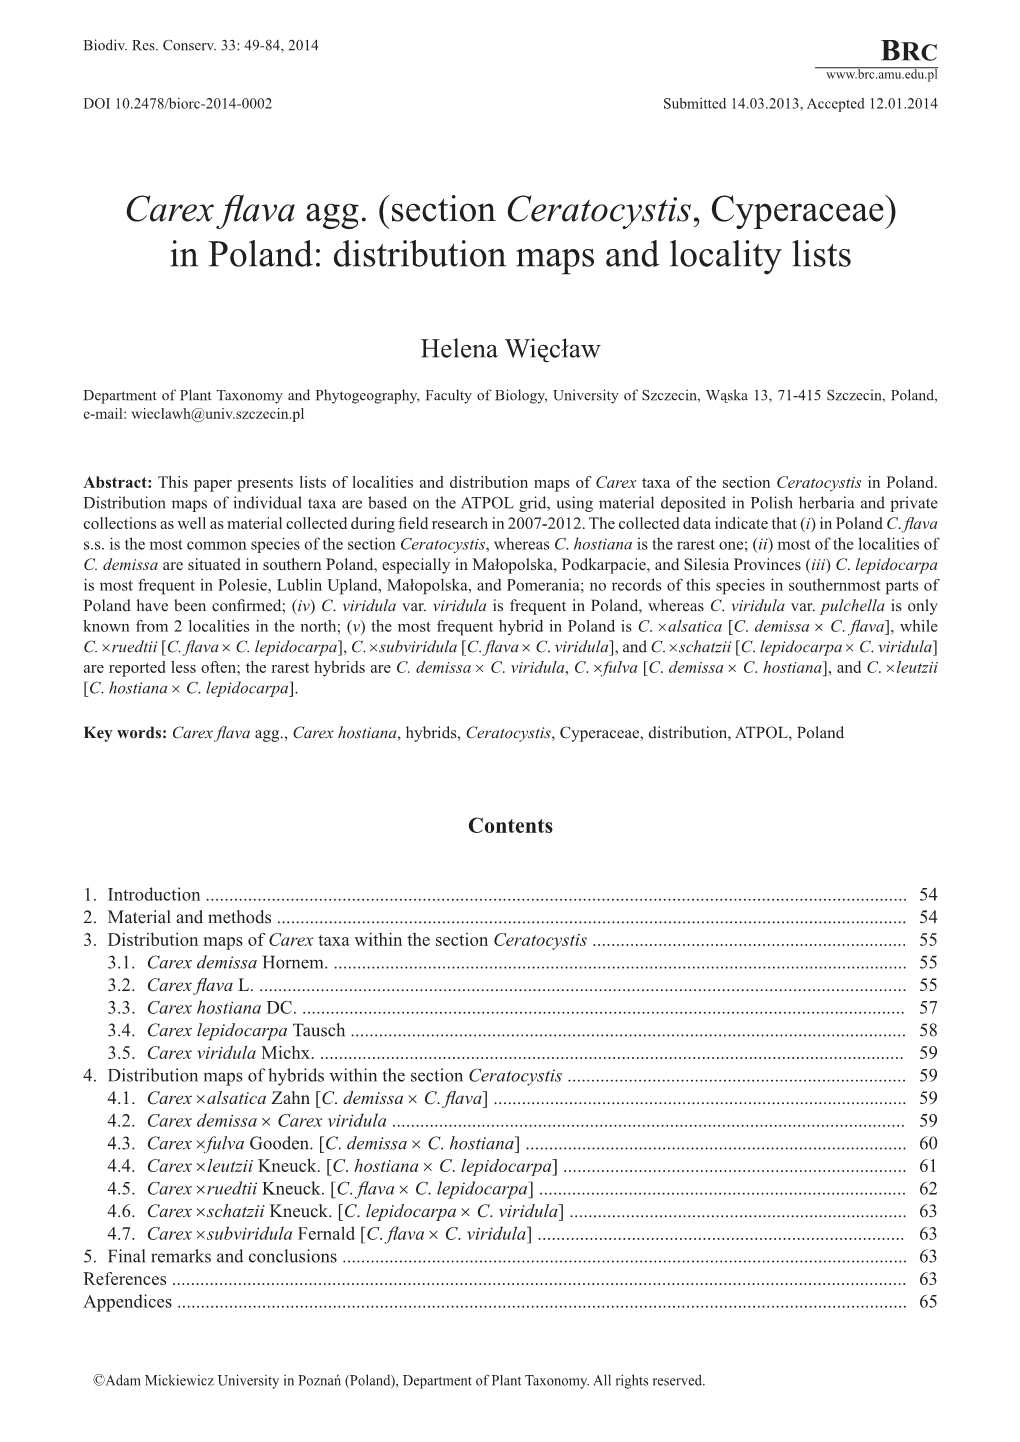 (Section Ceratocystis, Cyperaceae) in Poland: Distribution Maps and Locality Lists